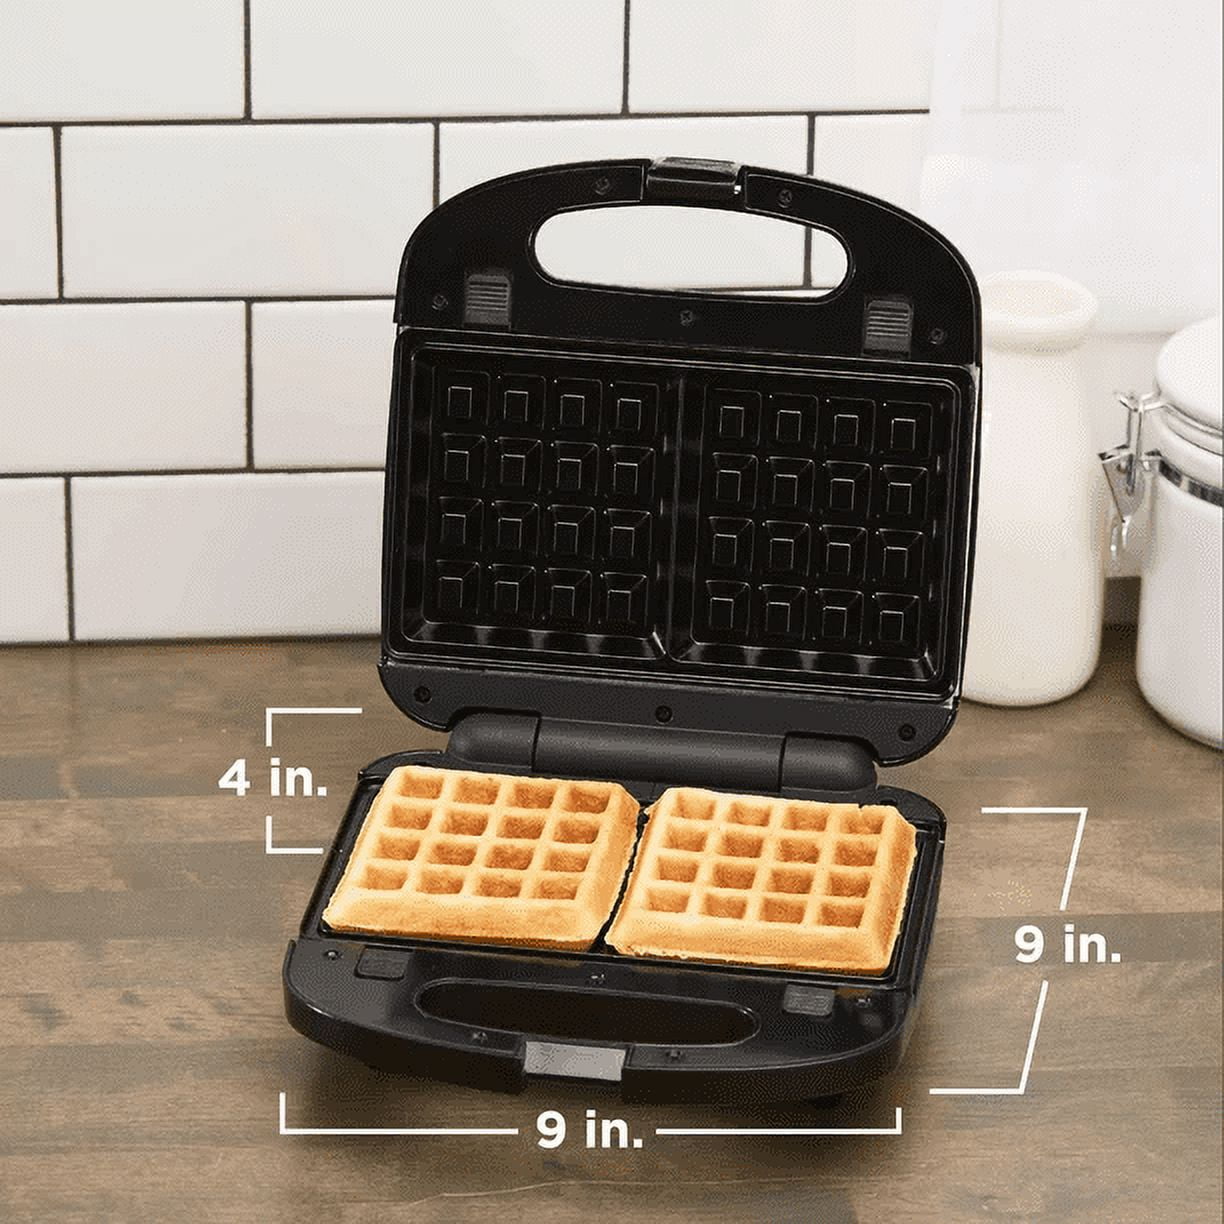 3 in 1 Detachable Sandwich Maker / Toaster, Waffle Maker & Grill  It is a Sandwich  Toaster/Sandwich Maker, Waffle Maker and a Grill at only Ksh.3,950 down from  Ksh.4,500. A 2